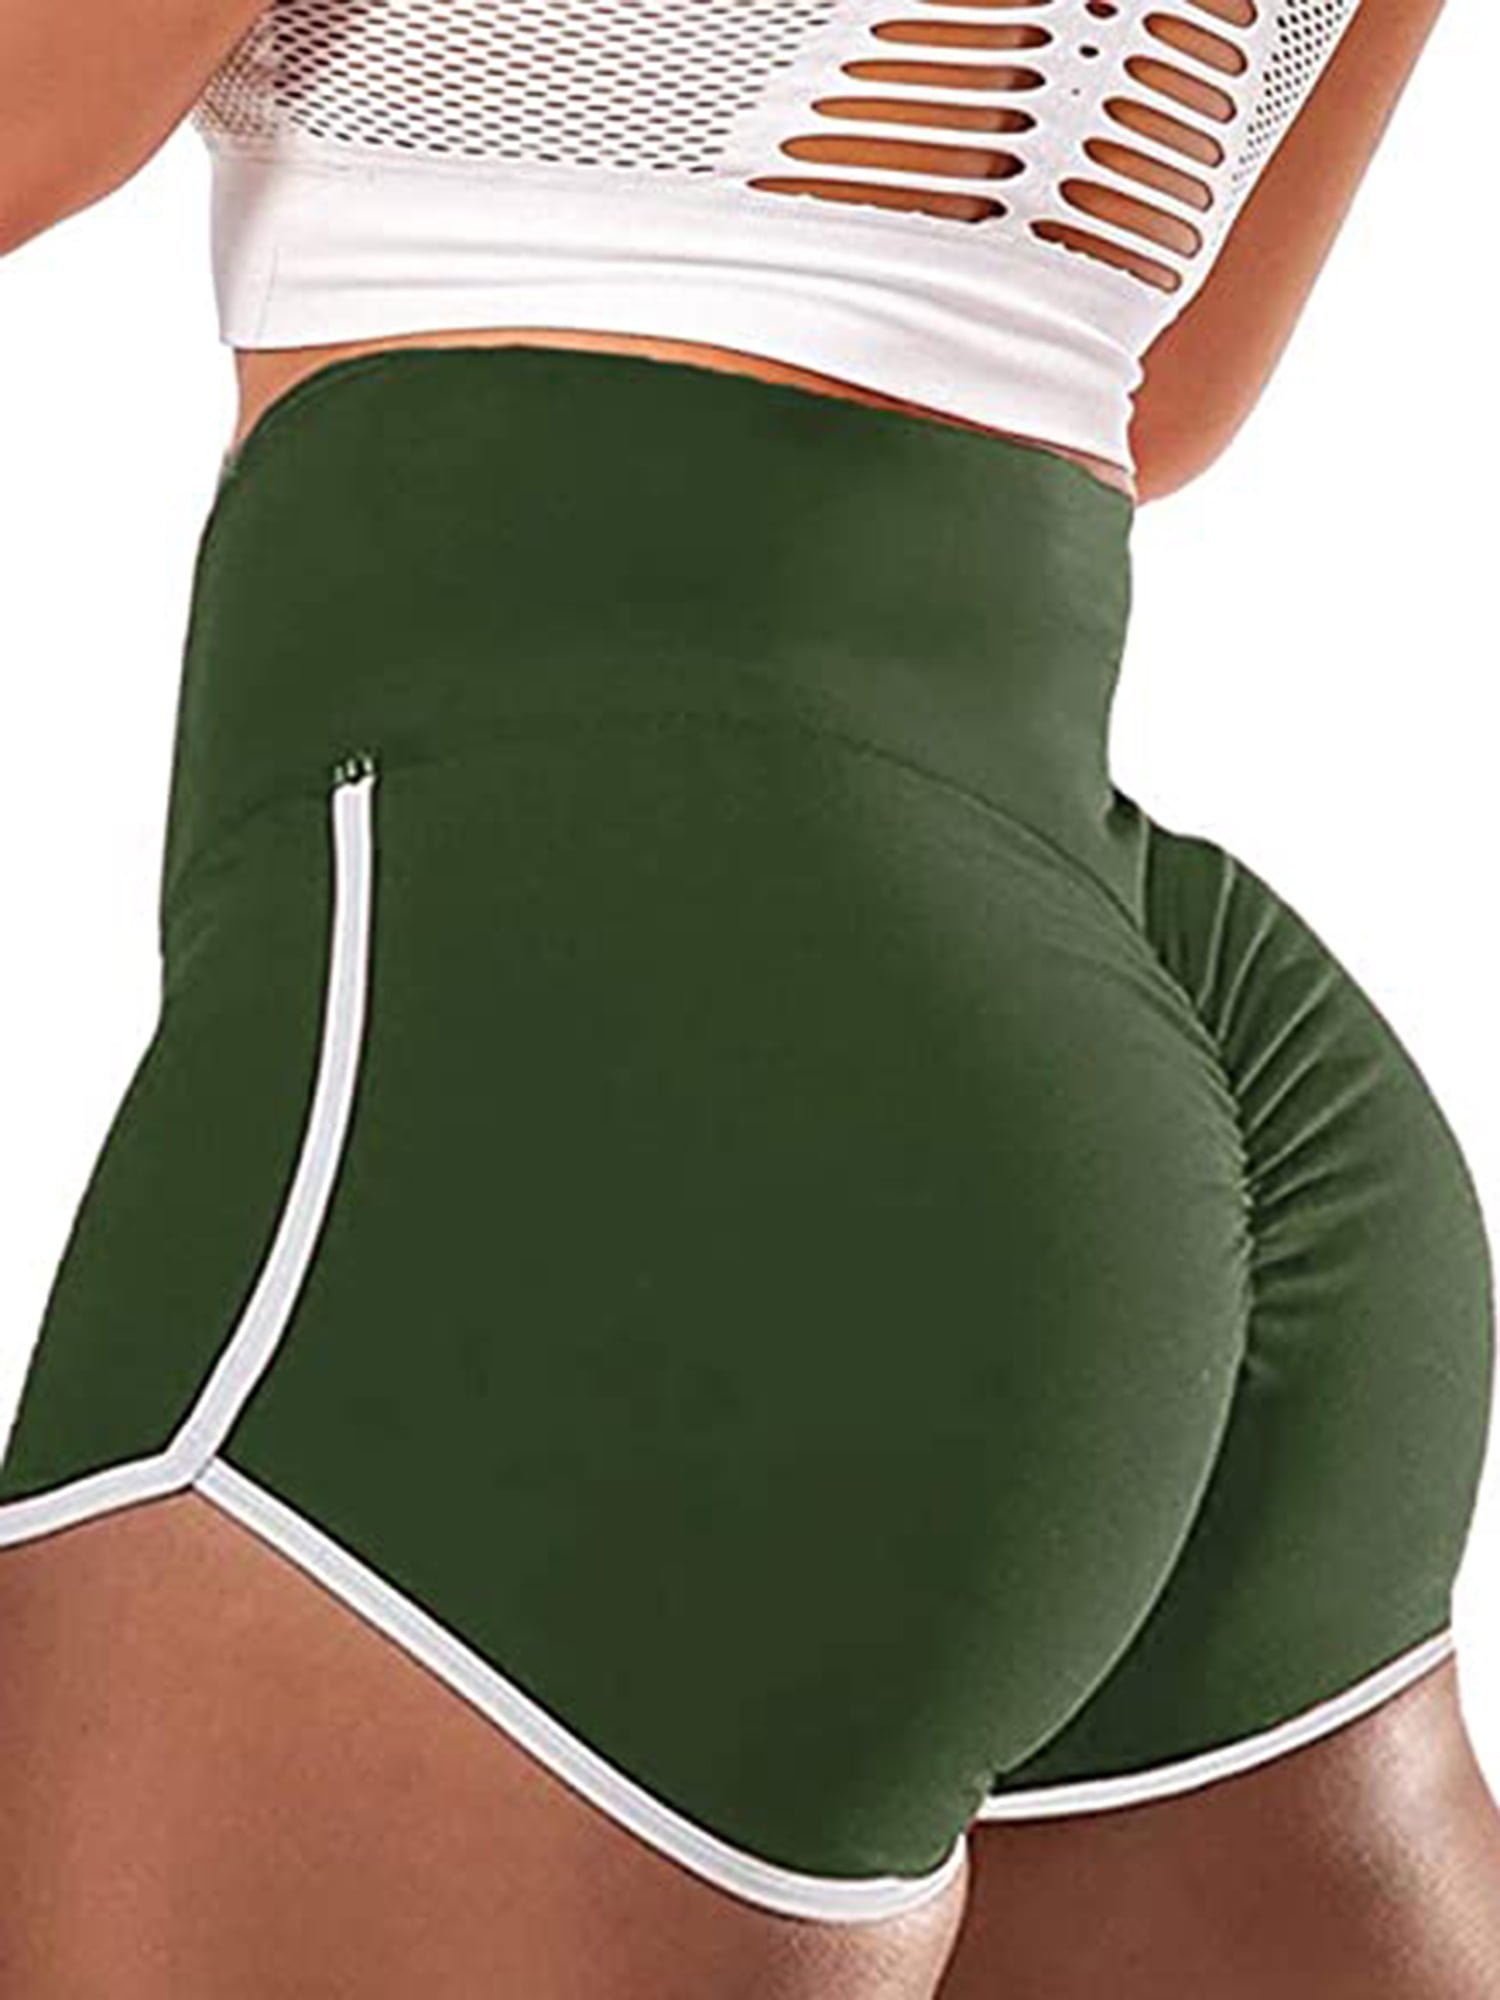 Sexy Booty Yoga Shorts Womens Stretch Workout High Waist Soft Gym Yoga Hot  Pants Leggings Active Running Biker Shorts Army Green at  Women's  Clothing store